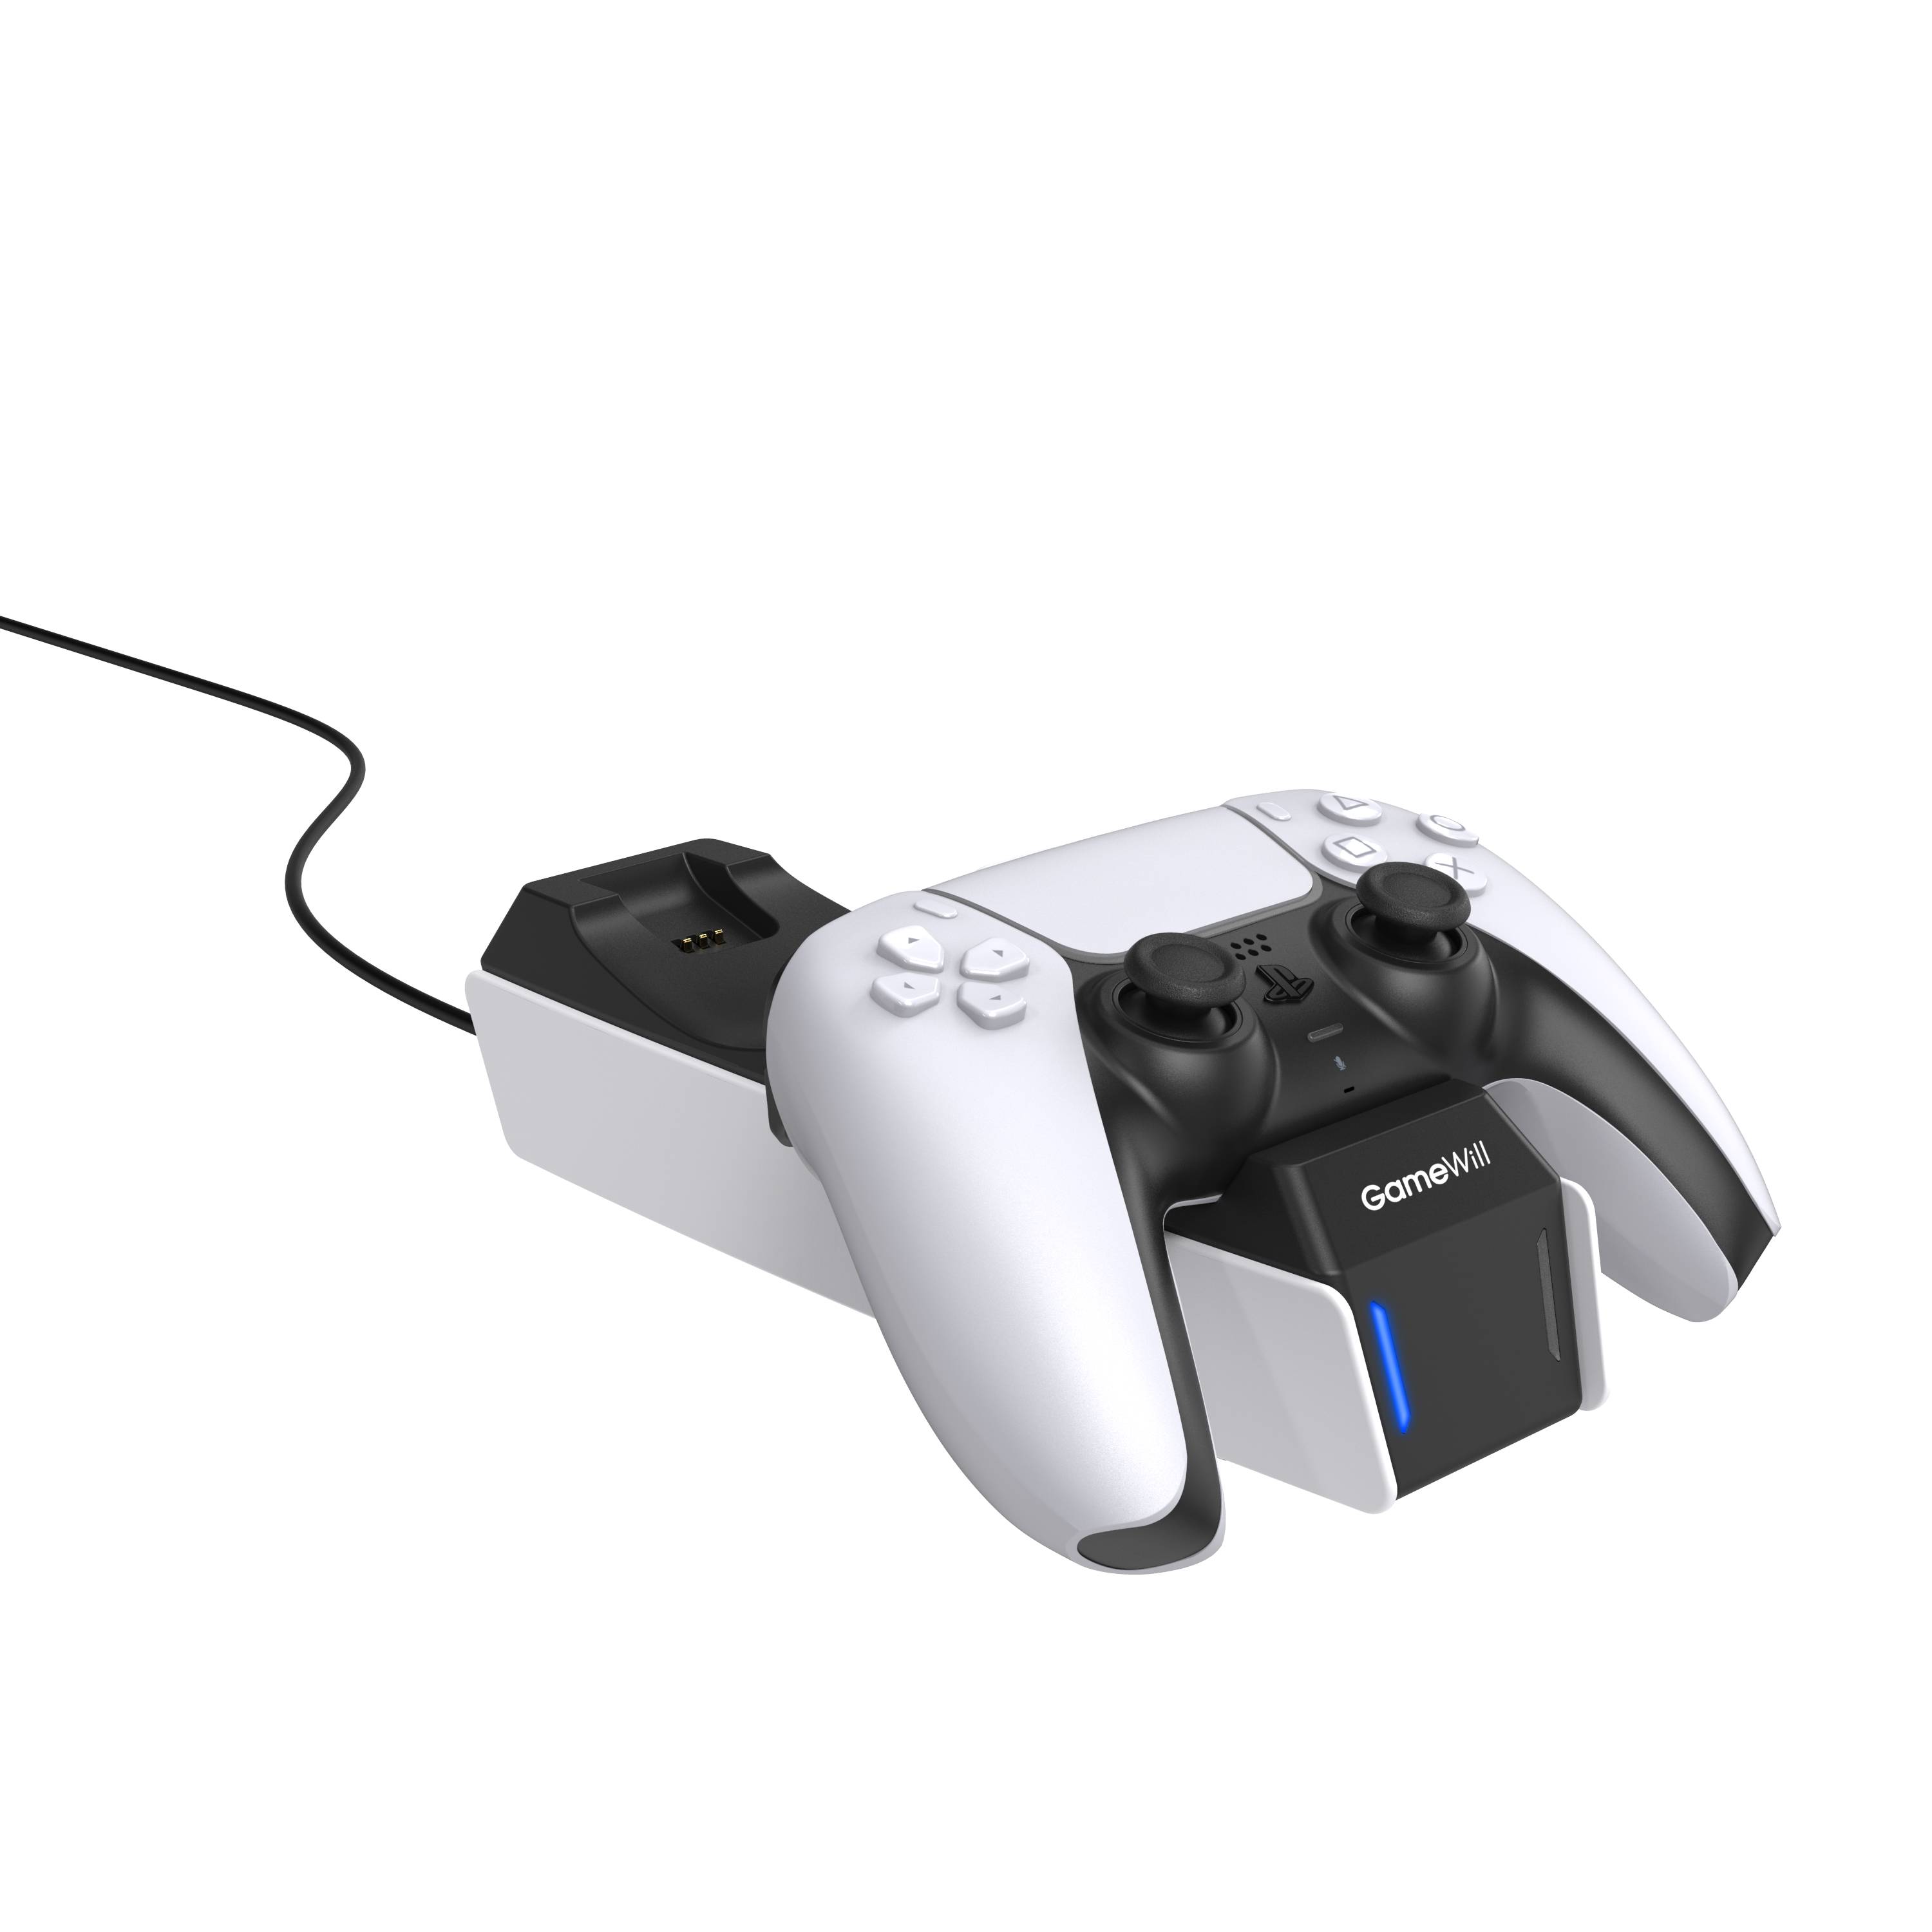 GameWill PS5 Controller Dual Charging Station